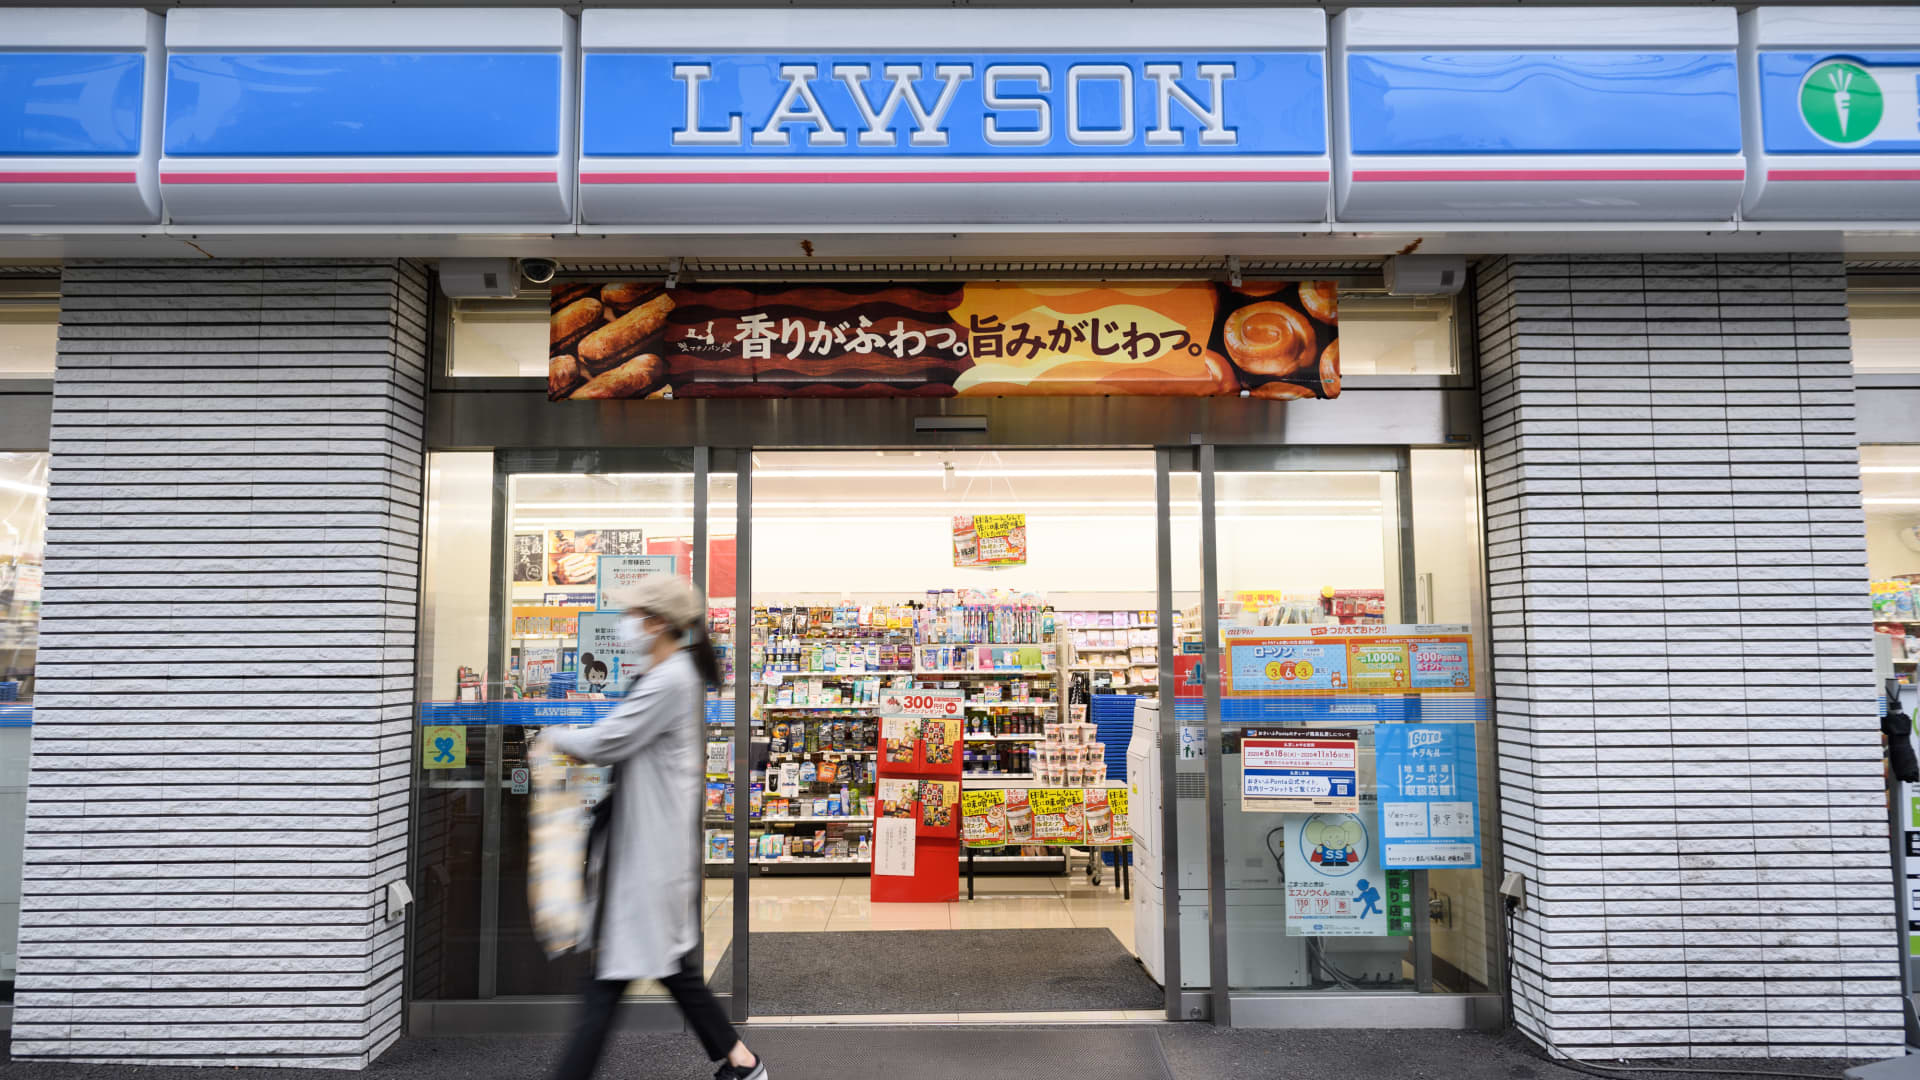 Lawson shares surge 18% after Japan's KDDI launches $3.4 billion privatization offer